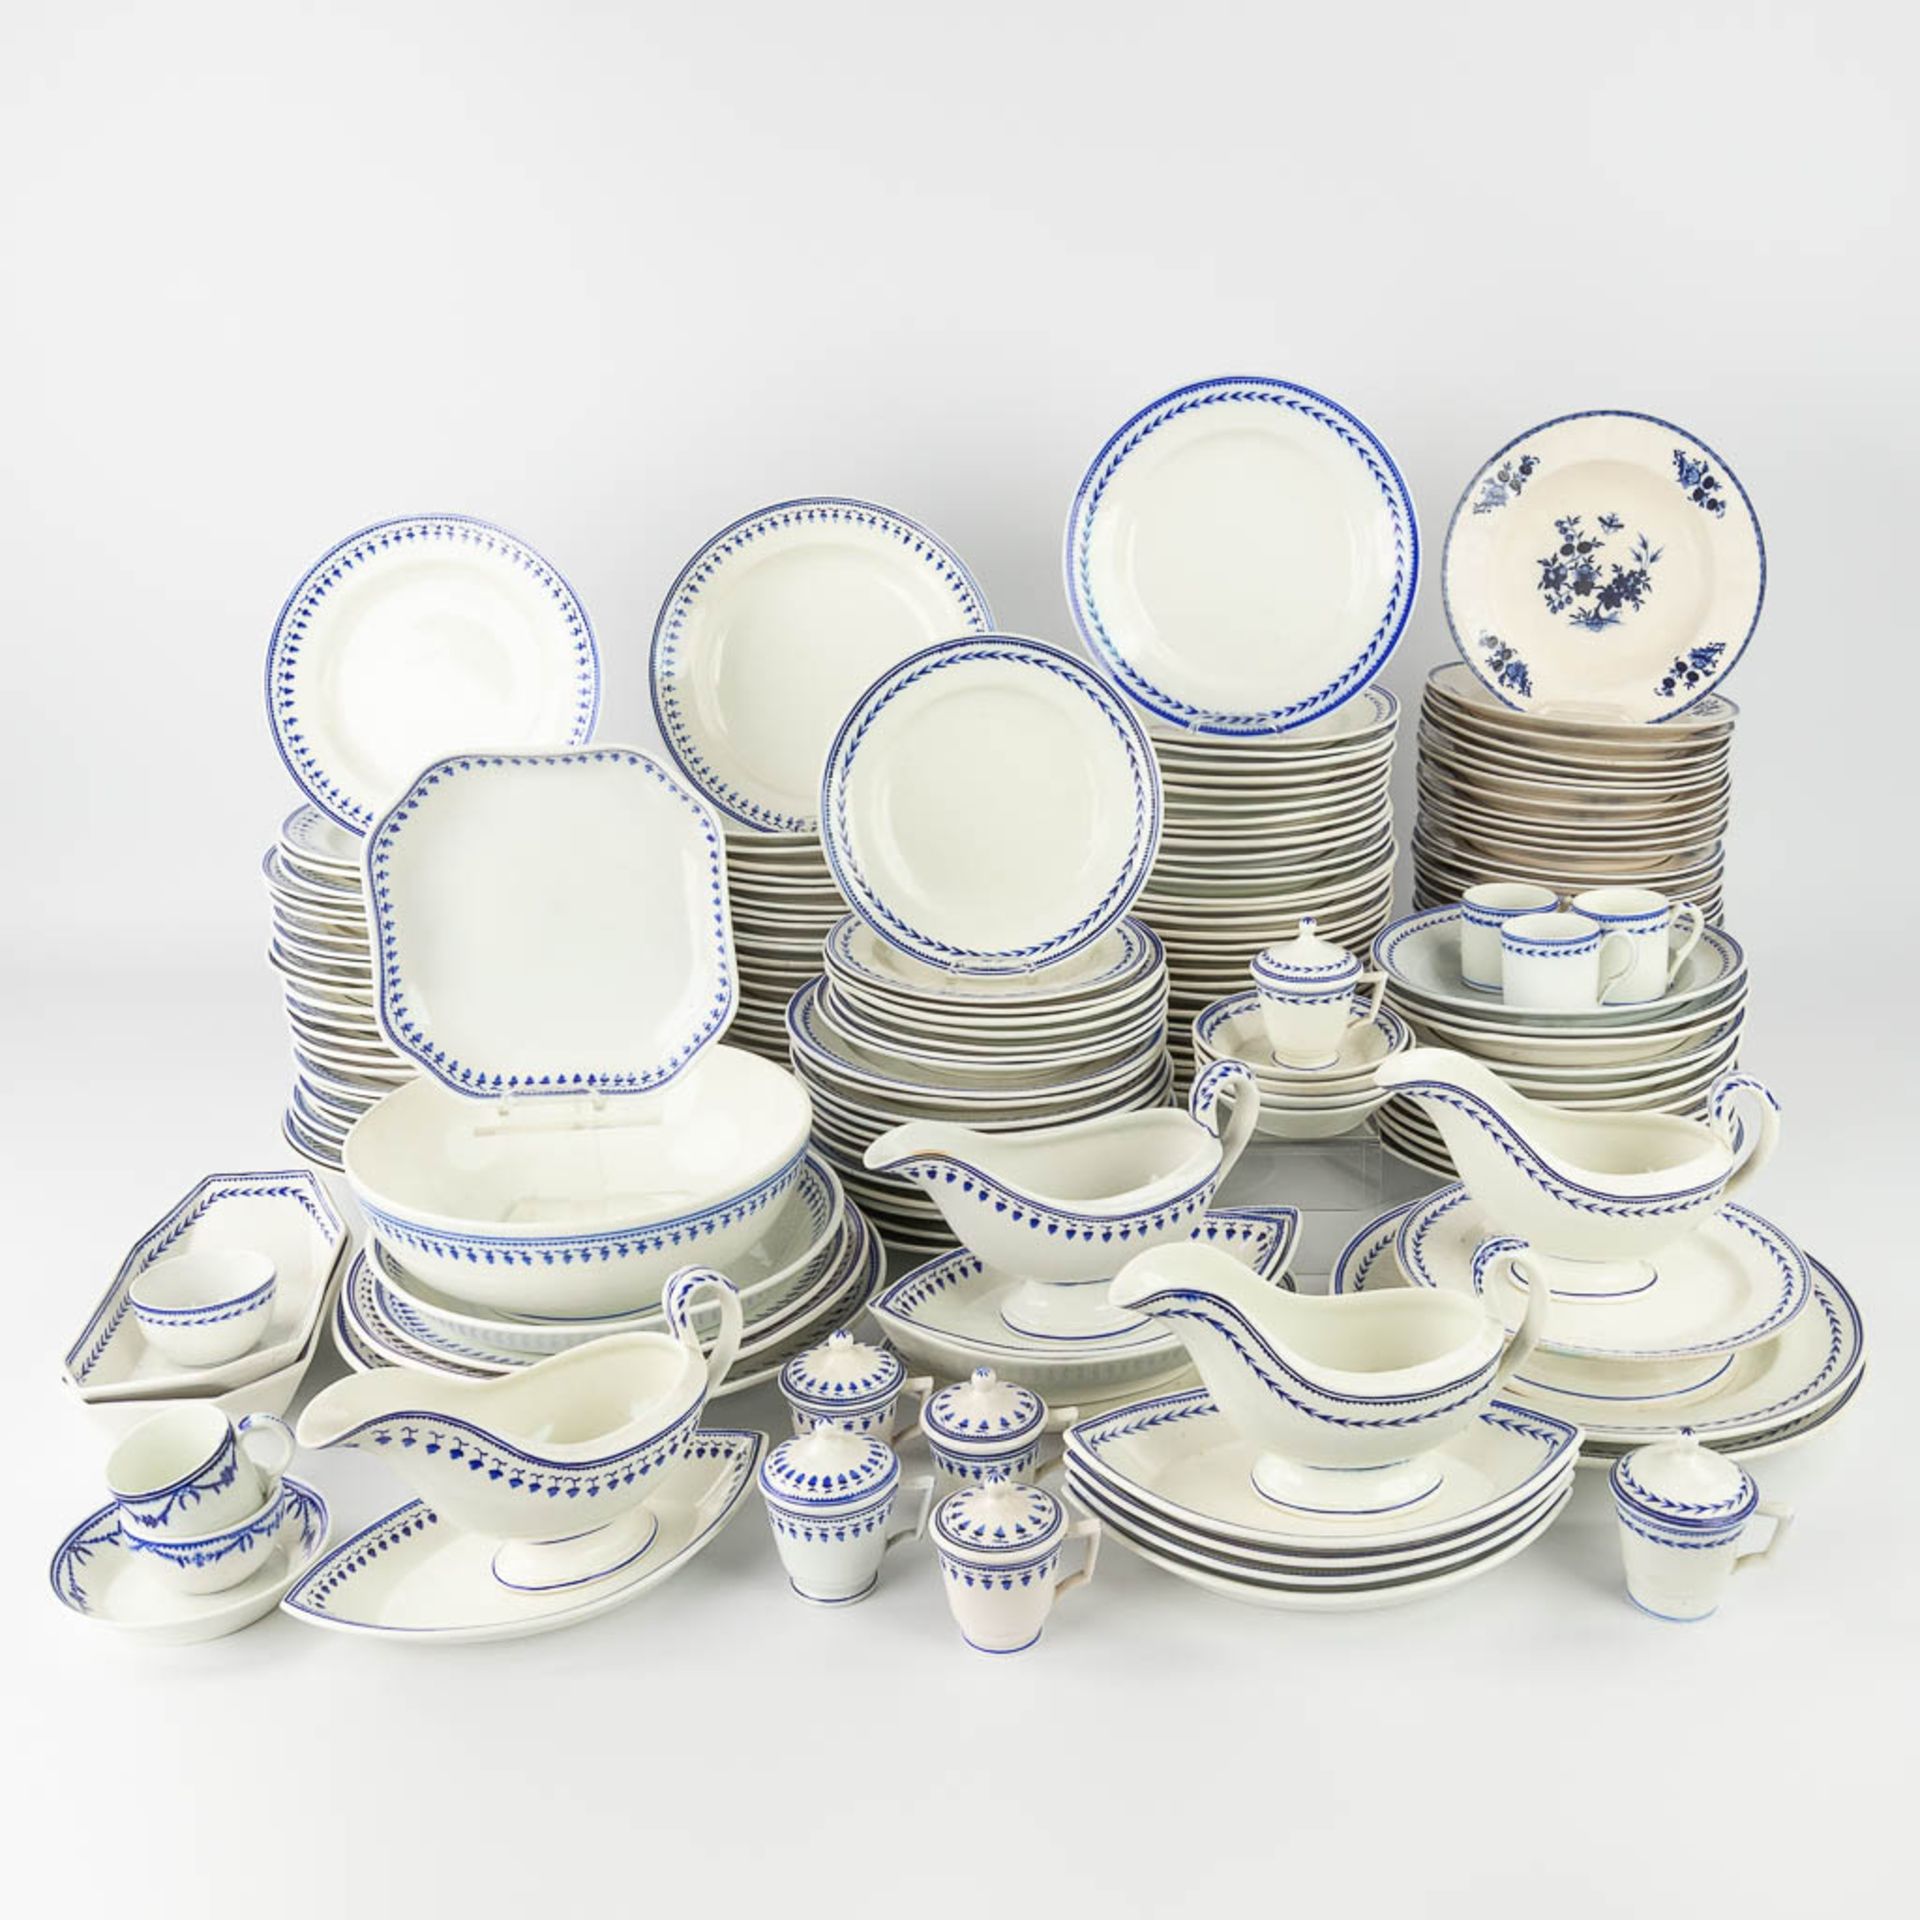 Tournai ceramics, a very large collection of faience plates, saucers and serving accessories. 174 pi